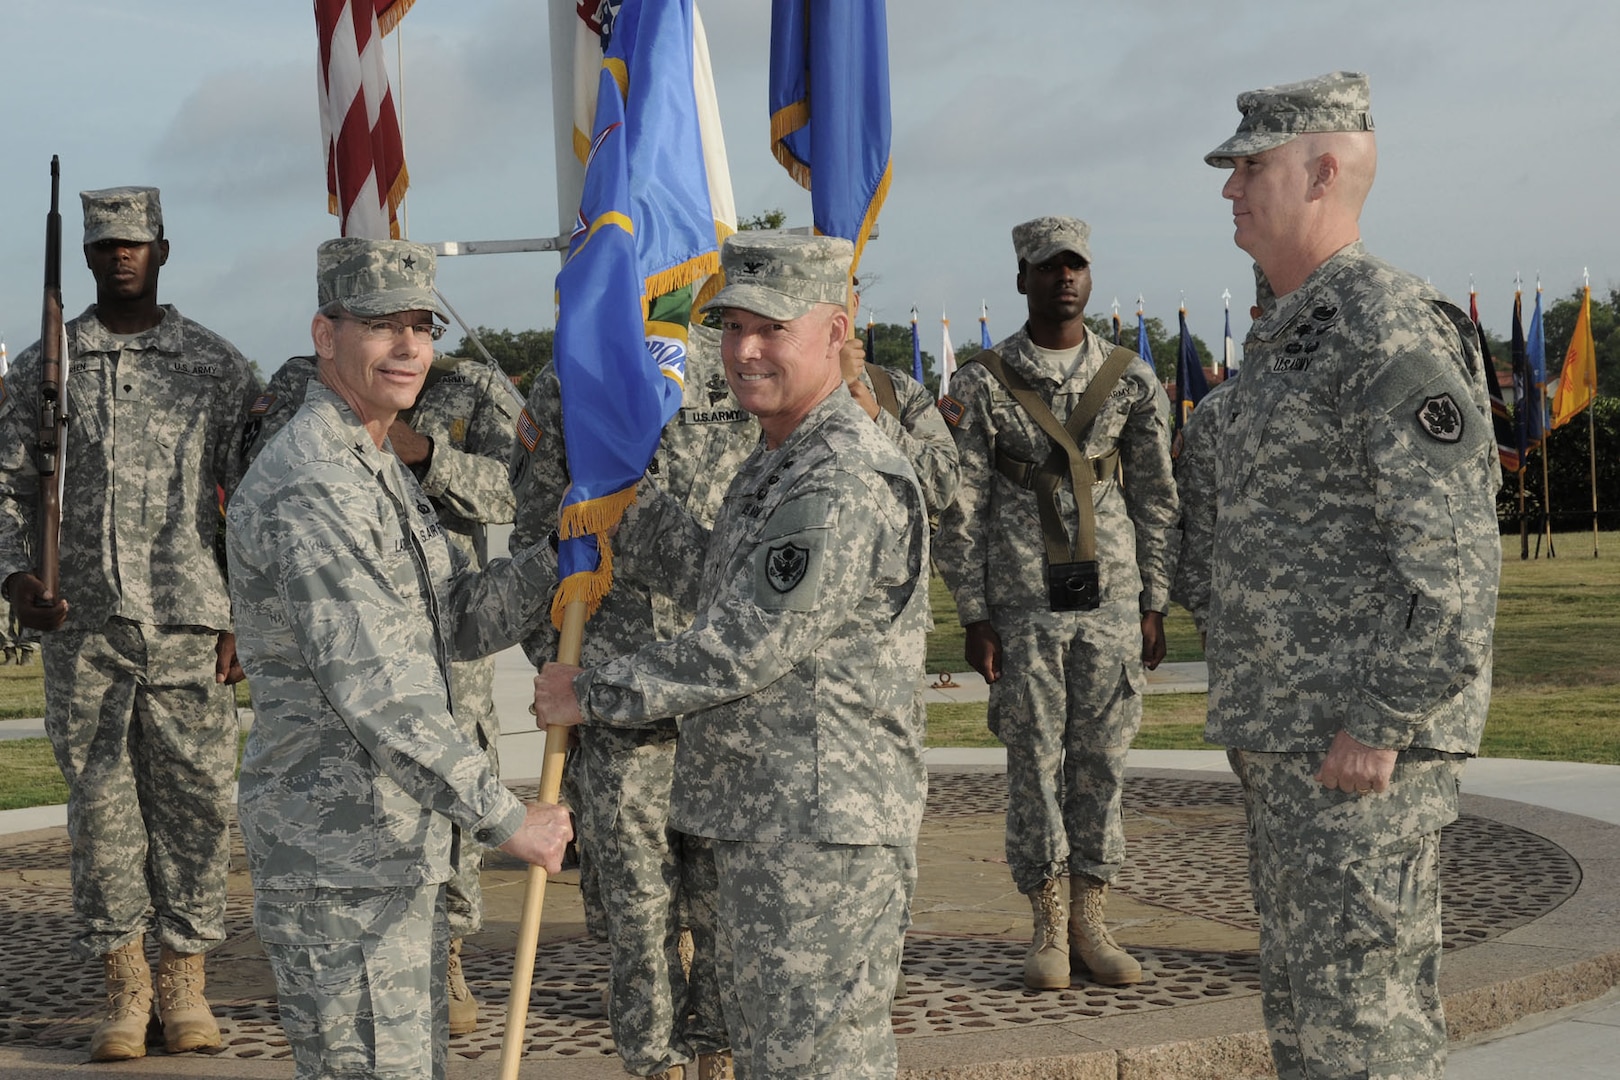 Brig. Gen. Bob LaBrutta (left), commander of the 502nd Air Base Wing and Joint Base San Antonio, passes the 502nd Mission Support Group colors to incoming 502nd MSG commander Col. Steven A. Toft, as outgoing commander Col. John P. Lamoureux (right) looks on. Lamoureux is leaving the 502nd MSG to become commander of the Dwight D. Eisenhower Army Medical Center at Fort Gordon, Ga. (Photo by Mike O'Rear, JBSA-Fort Sam Houston Visual Information)